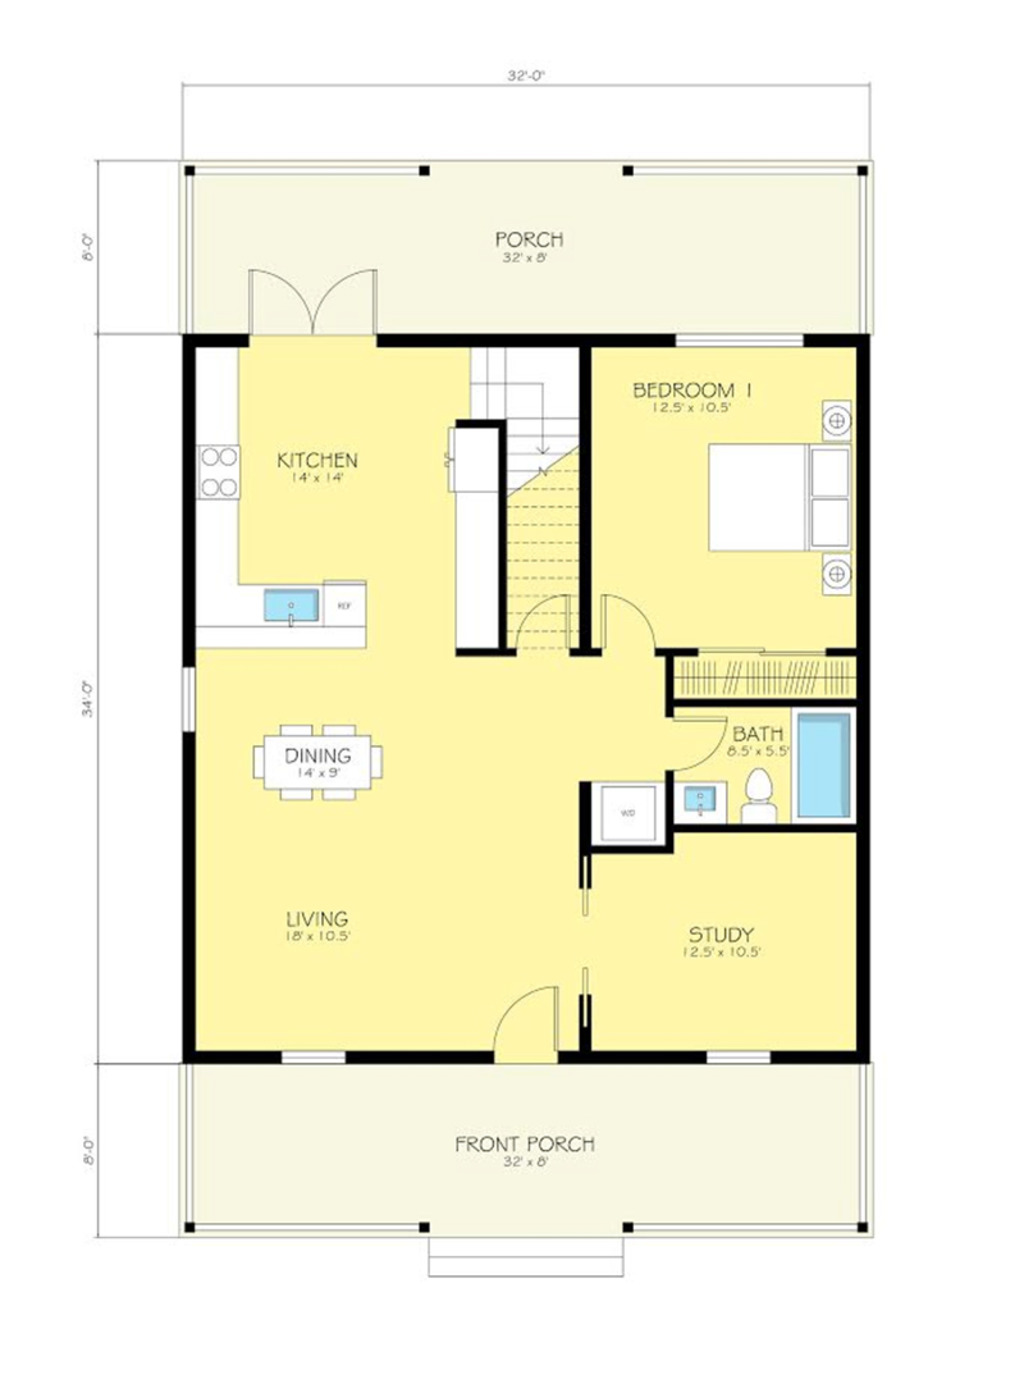 Great How To Draw A House Plan Online Free in the world The ultimate guide 